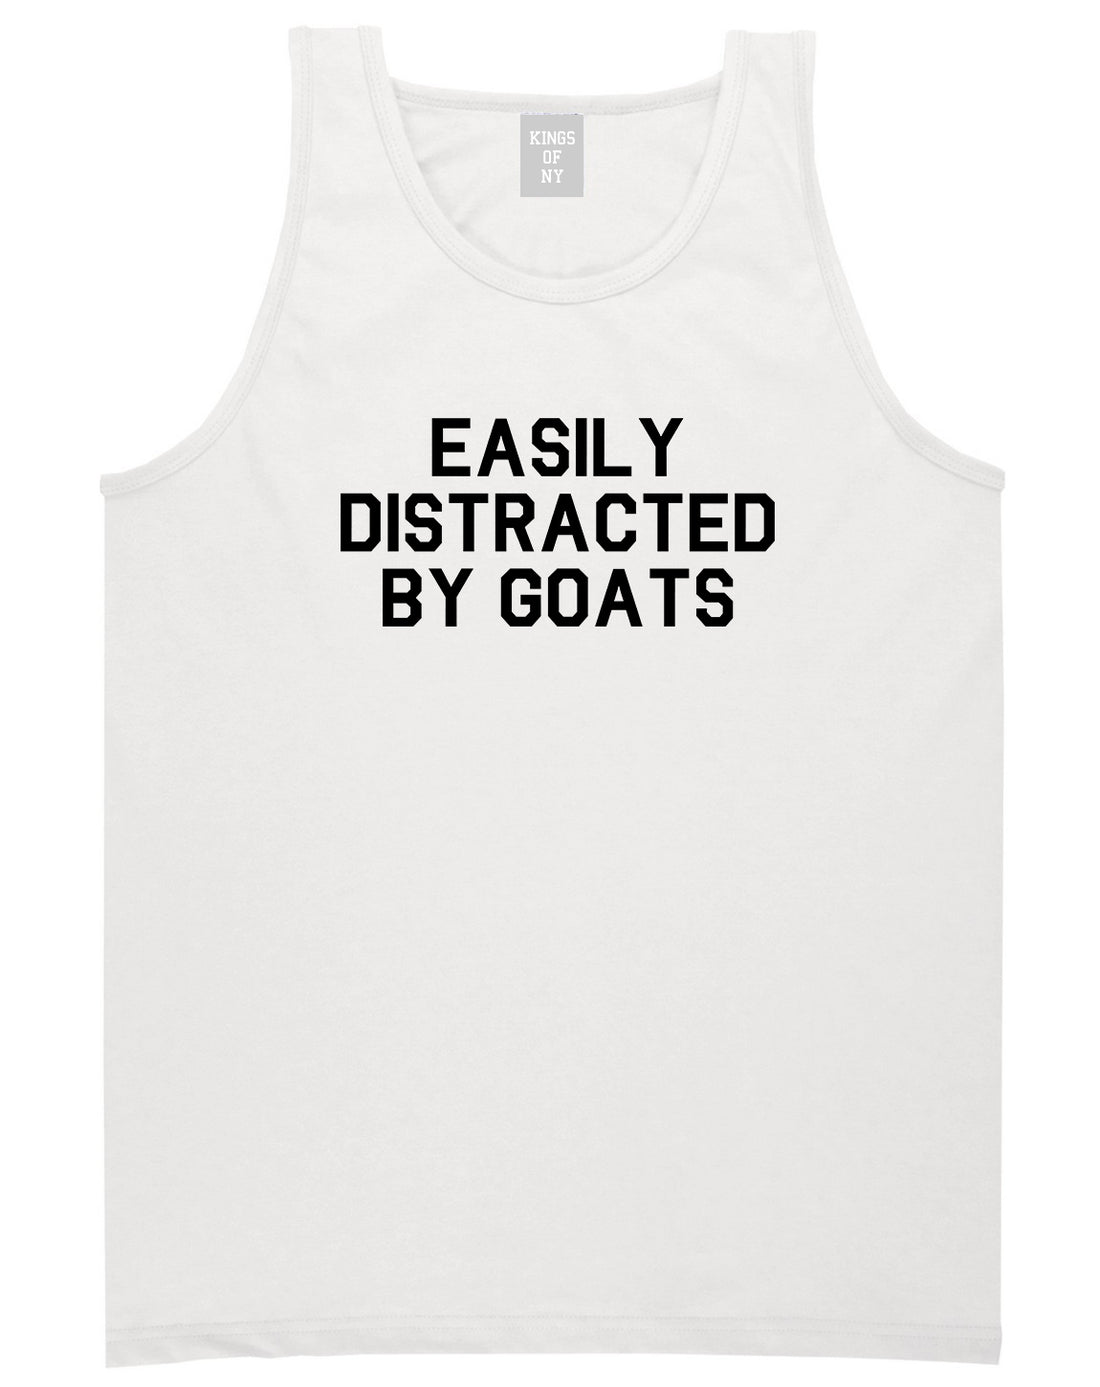 Easily Distracted By Goats Mens Tank Top Shirt White